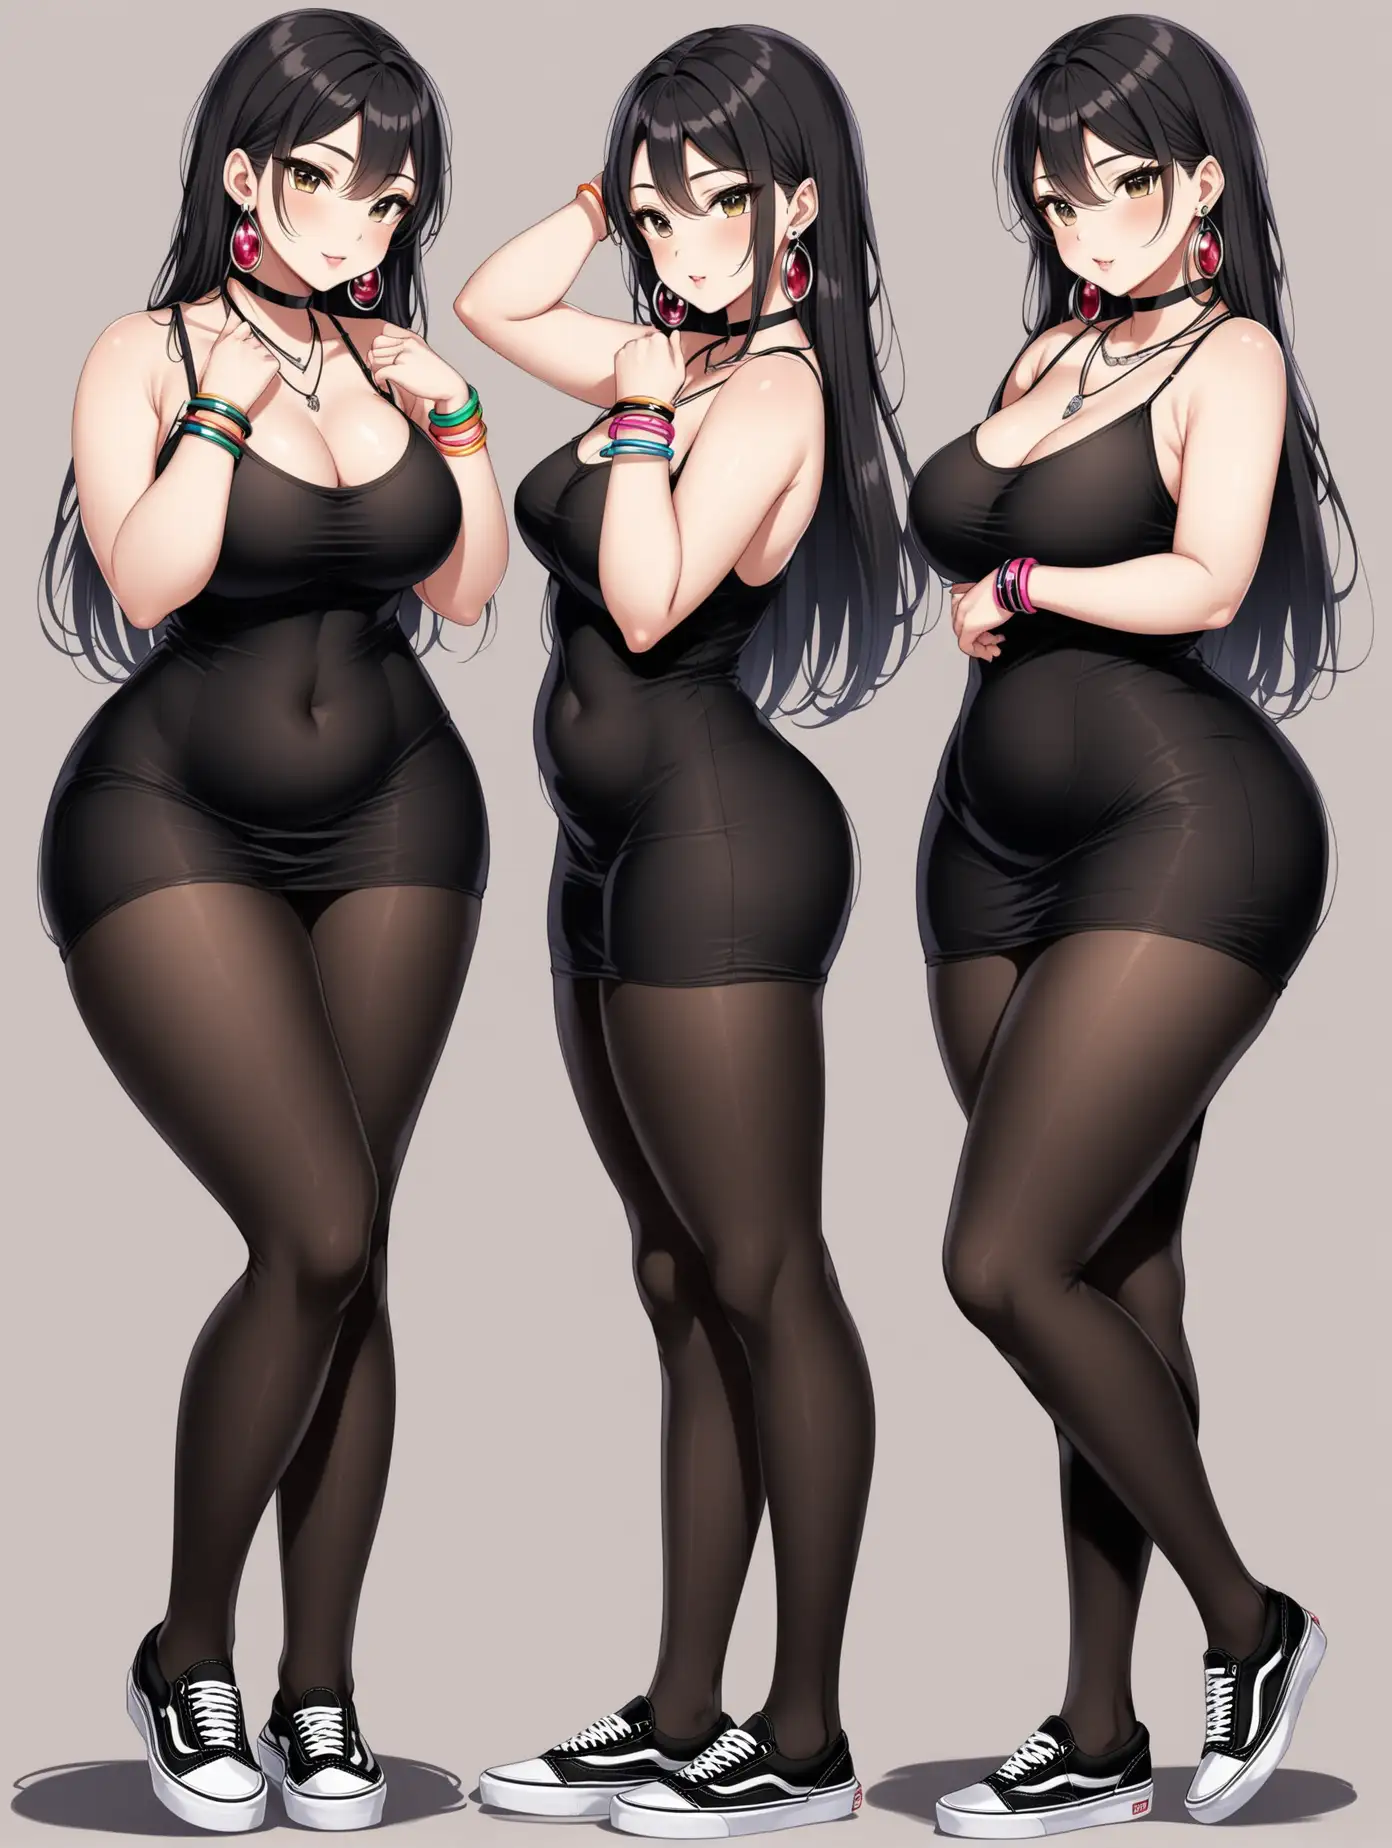 Sensual picture of a hot anime girl, age 25, curvy, height: tall, big ass, black pantyhose body stockings, long shirt dress, wearing vans slip-ons, choker, necklaces, big earrings, wristbands, 2 poses